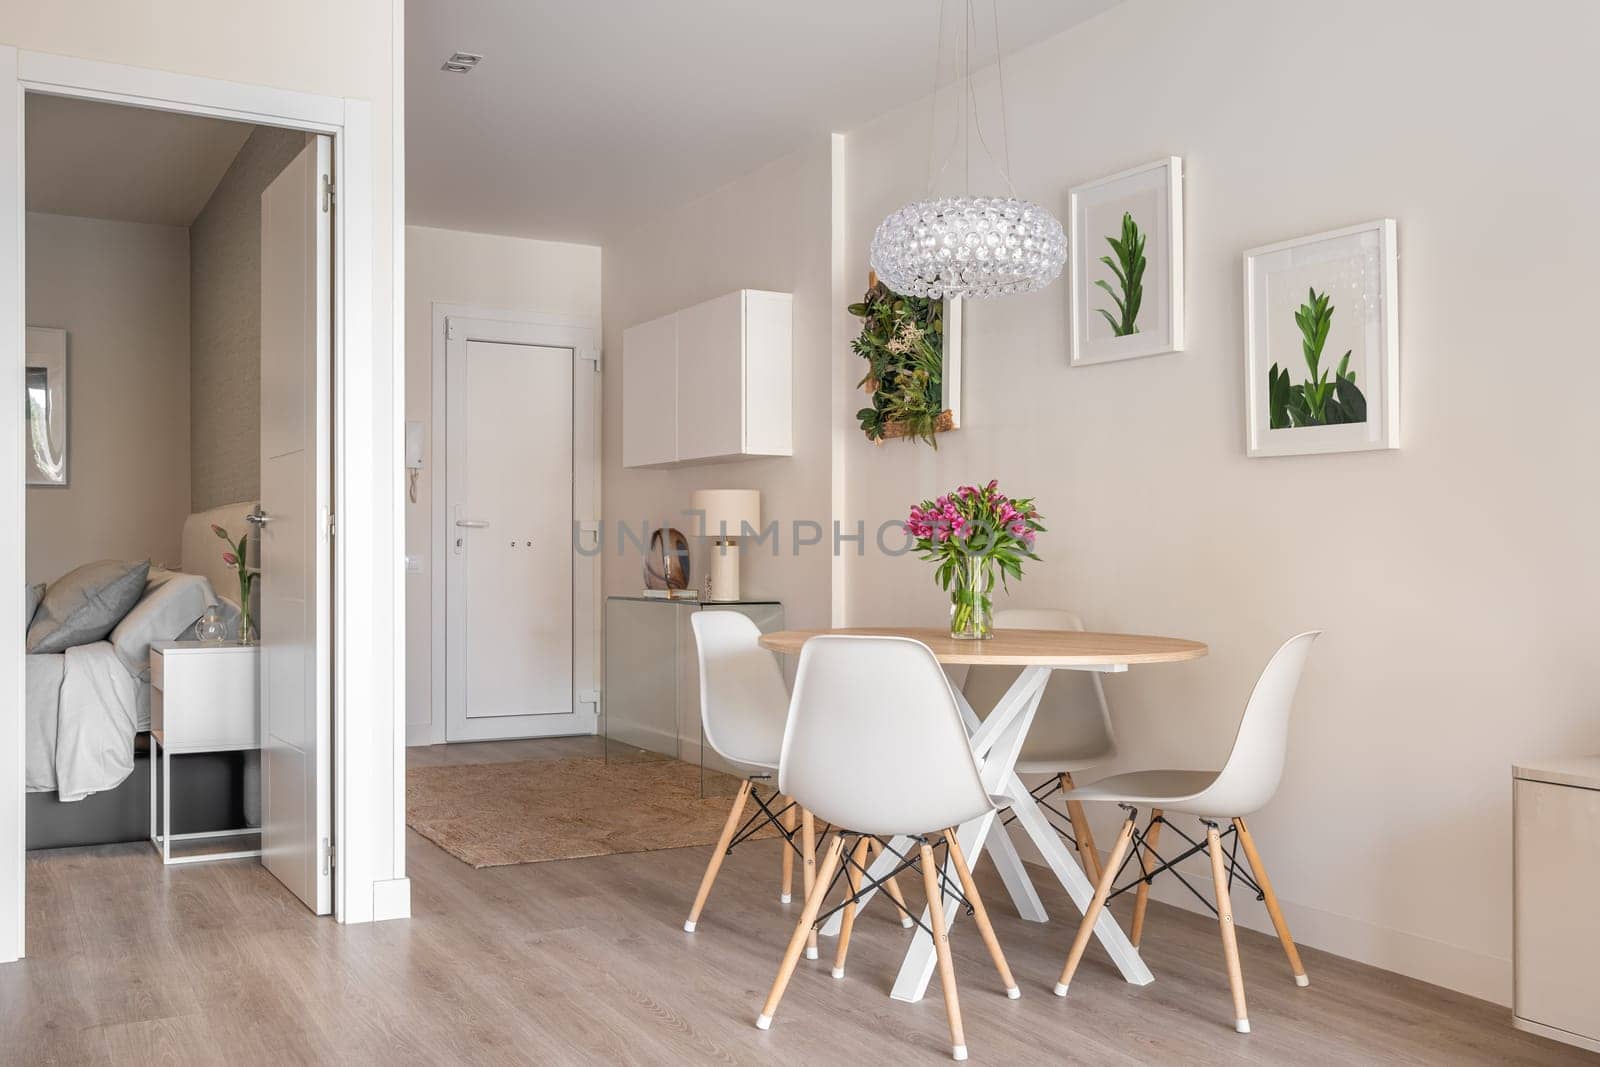 Stylish interior in a compact apartment with a spacious combined living room with table, chairs and decorative accessories overlooking the open bedroom. Cozy city apartment.